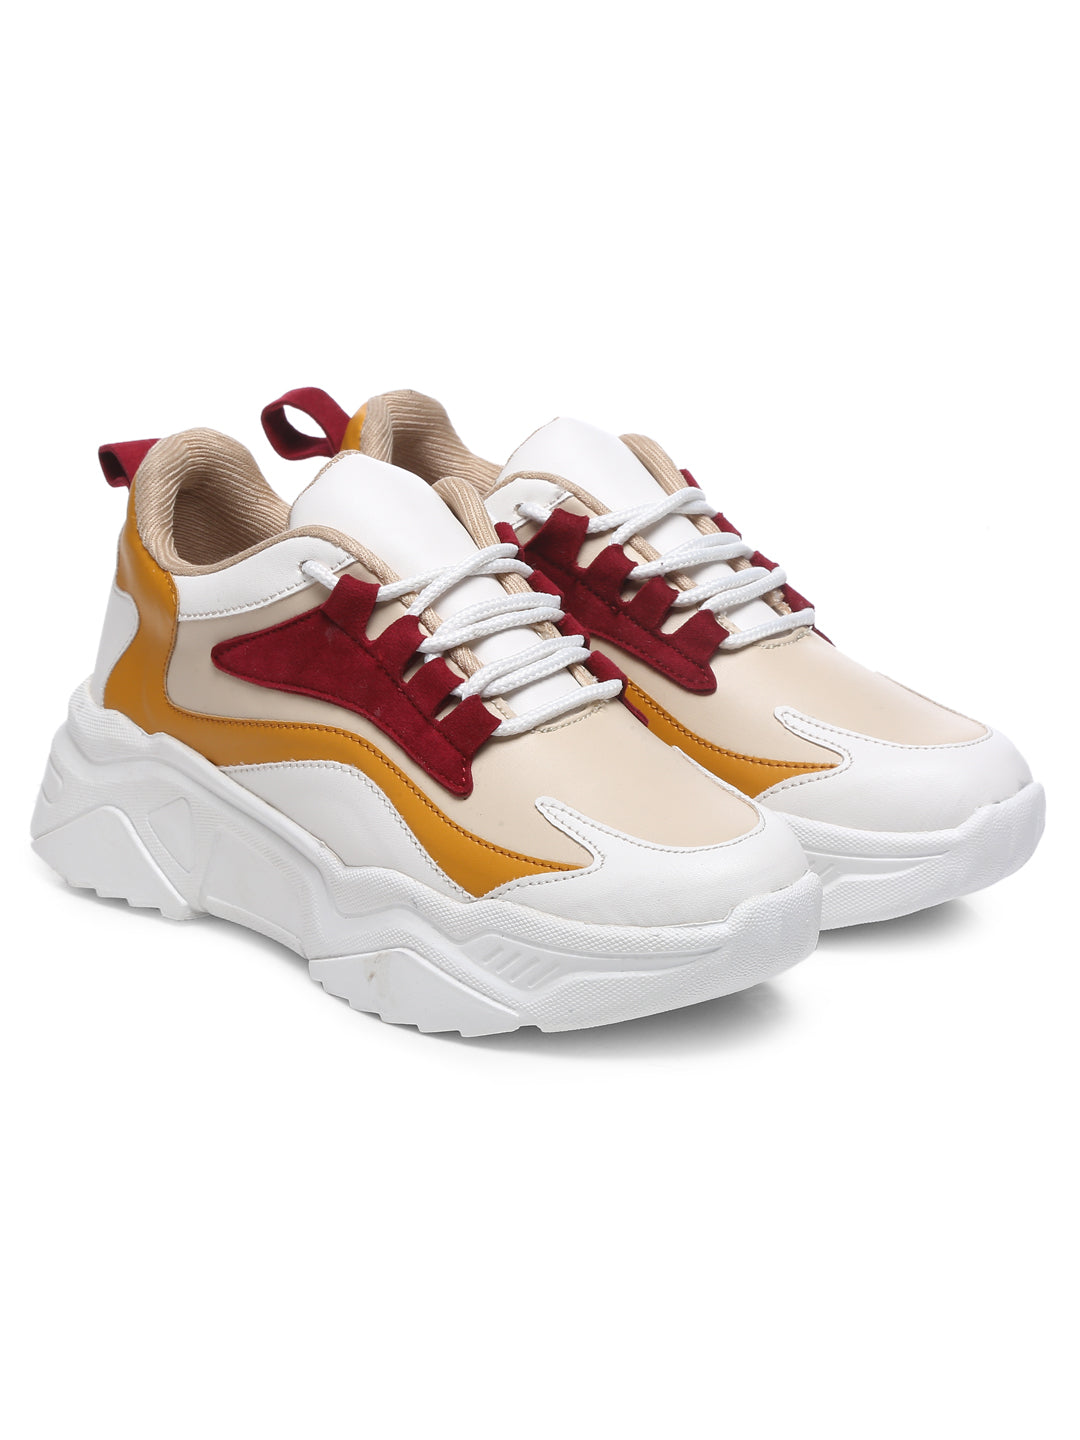 GNIST Yellow Maroon Chuncky Colour Blocked Sneakers